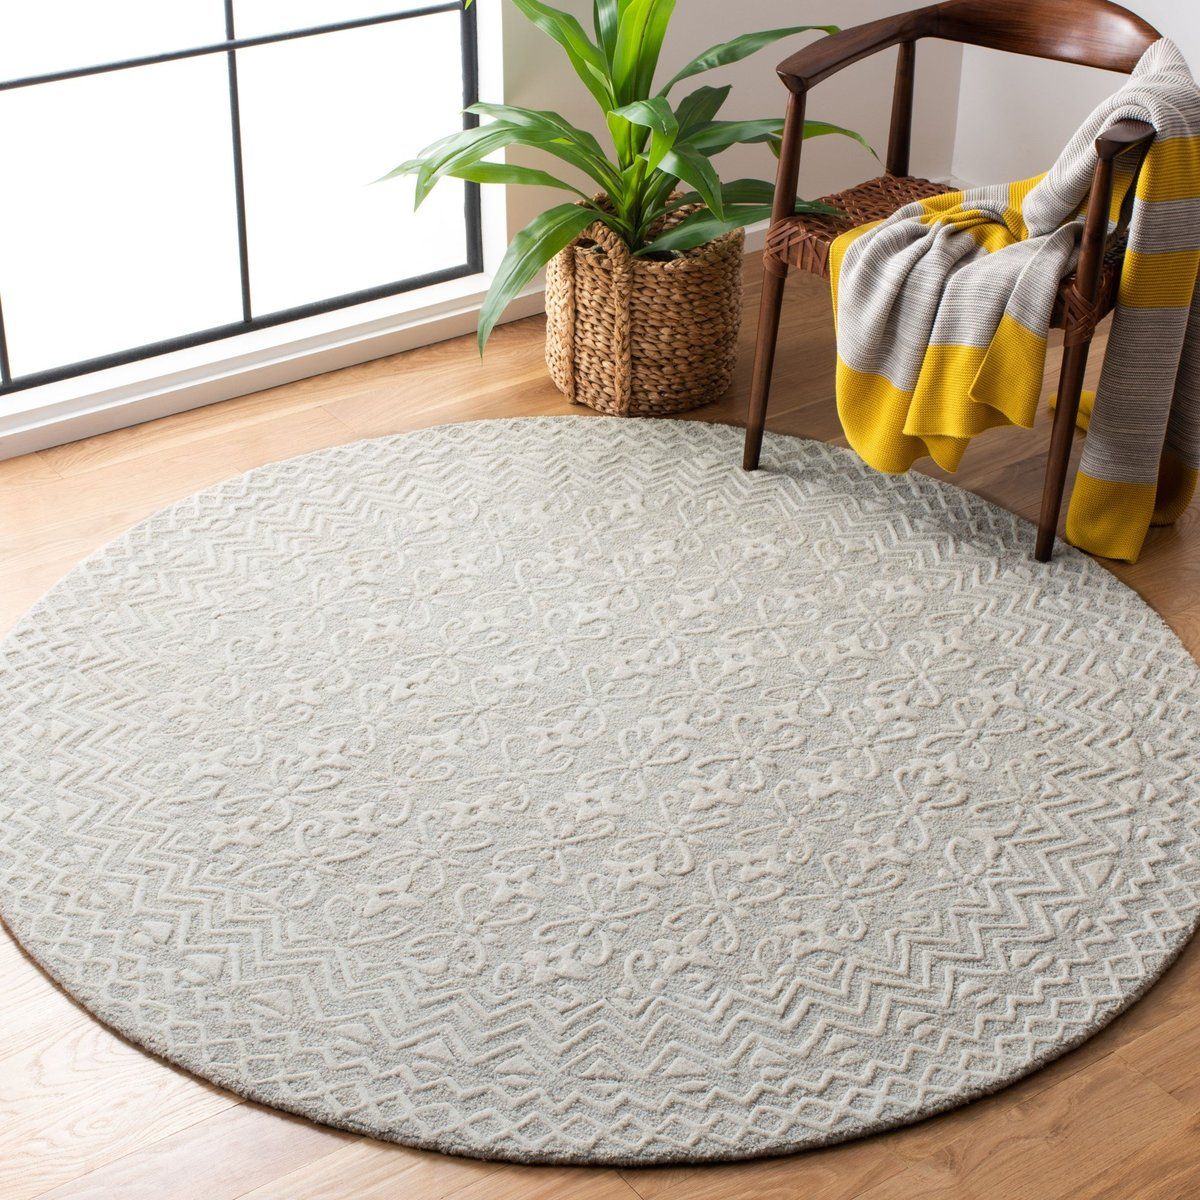 Safavieh Blossom Blm 114 Modern Wool Area Rugs | Rugs Direct Intended For Ivory Blossom Oval Rugs (View 14 of 15)